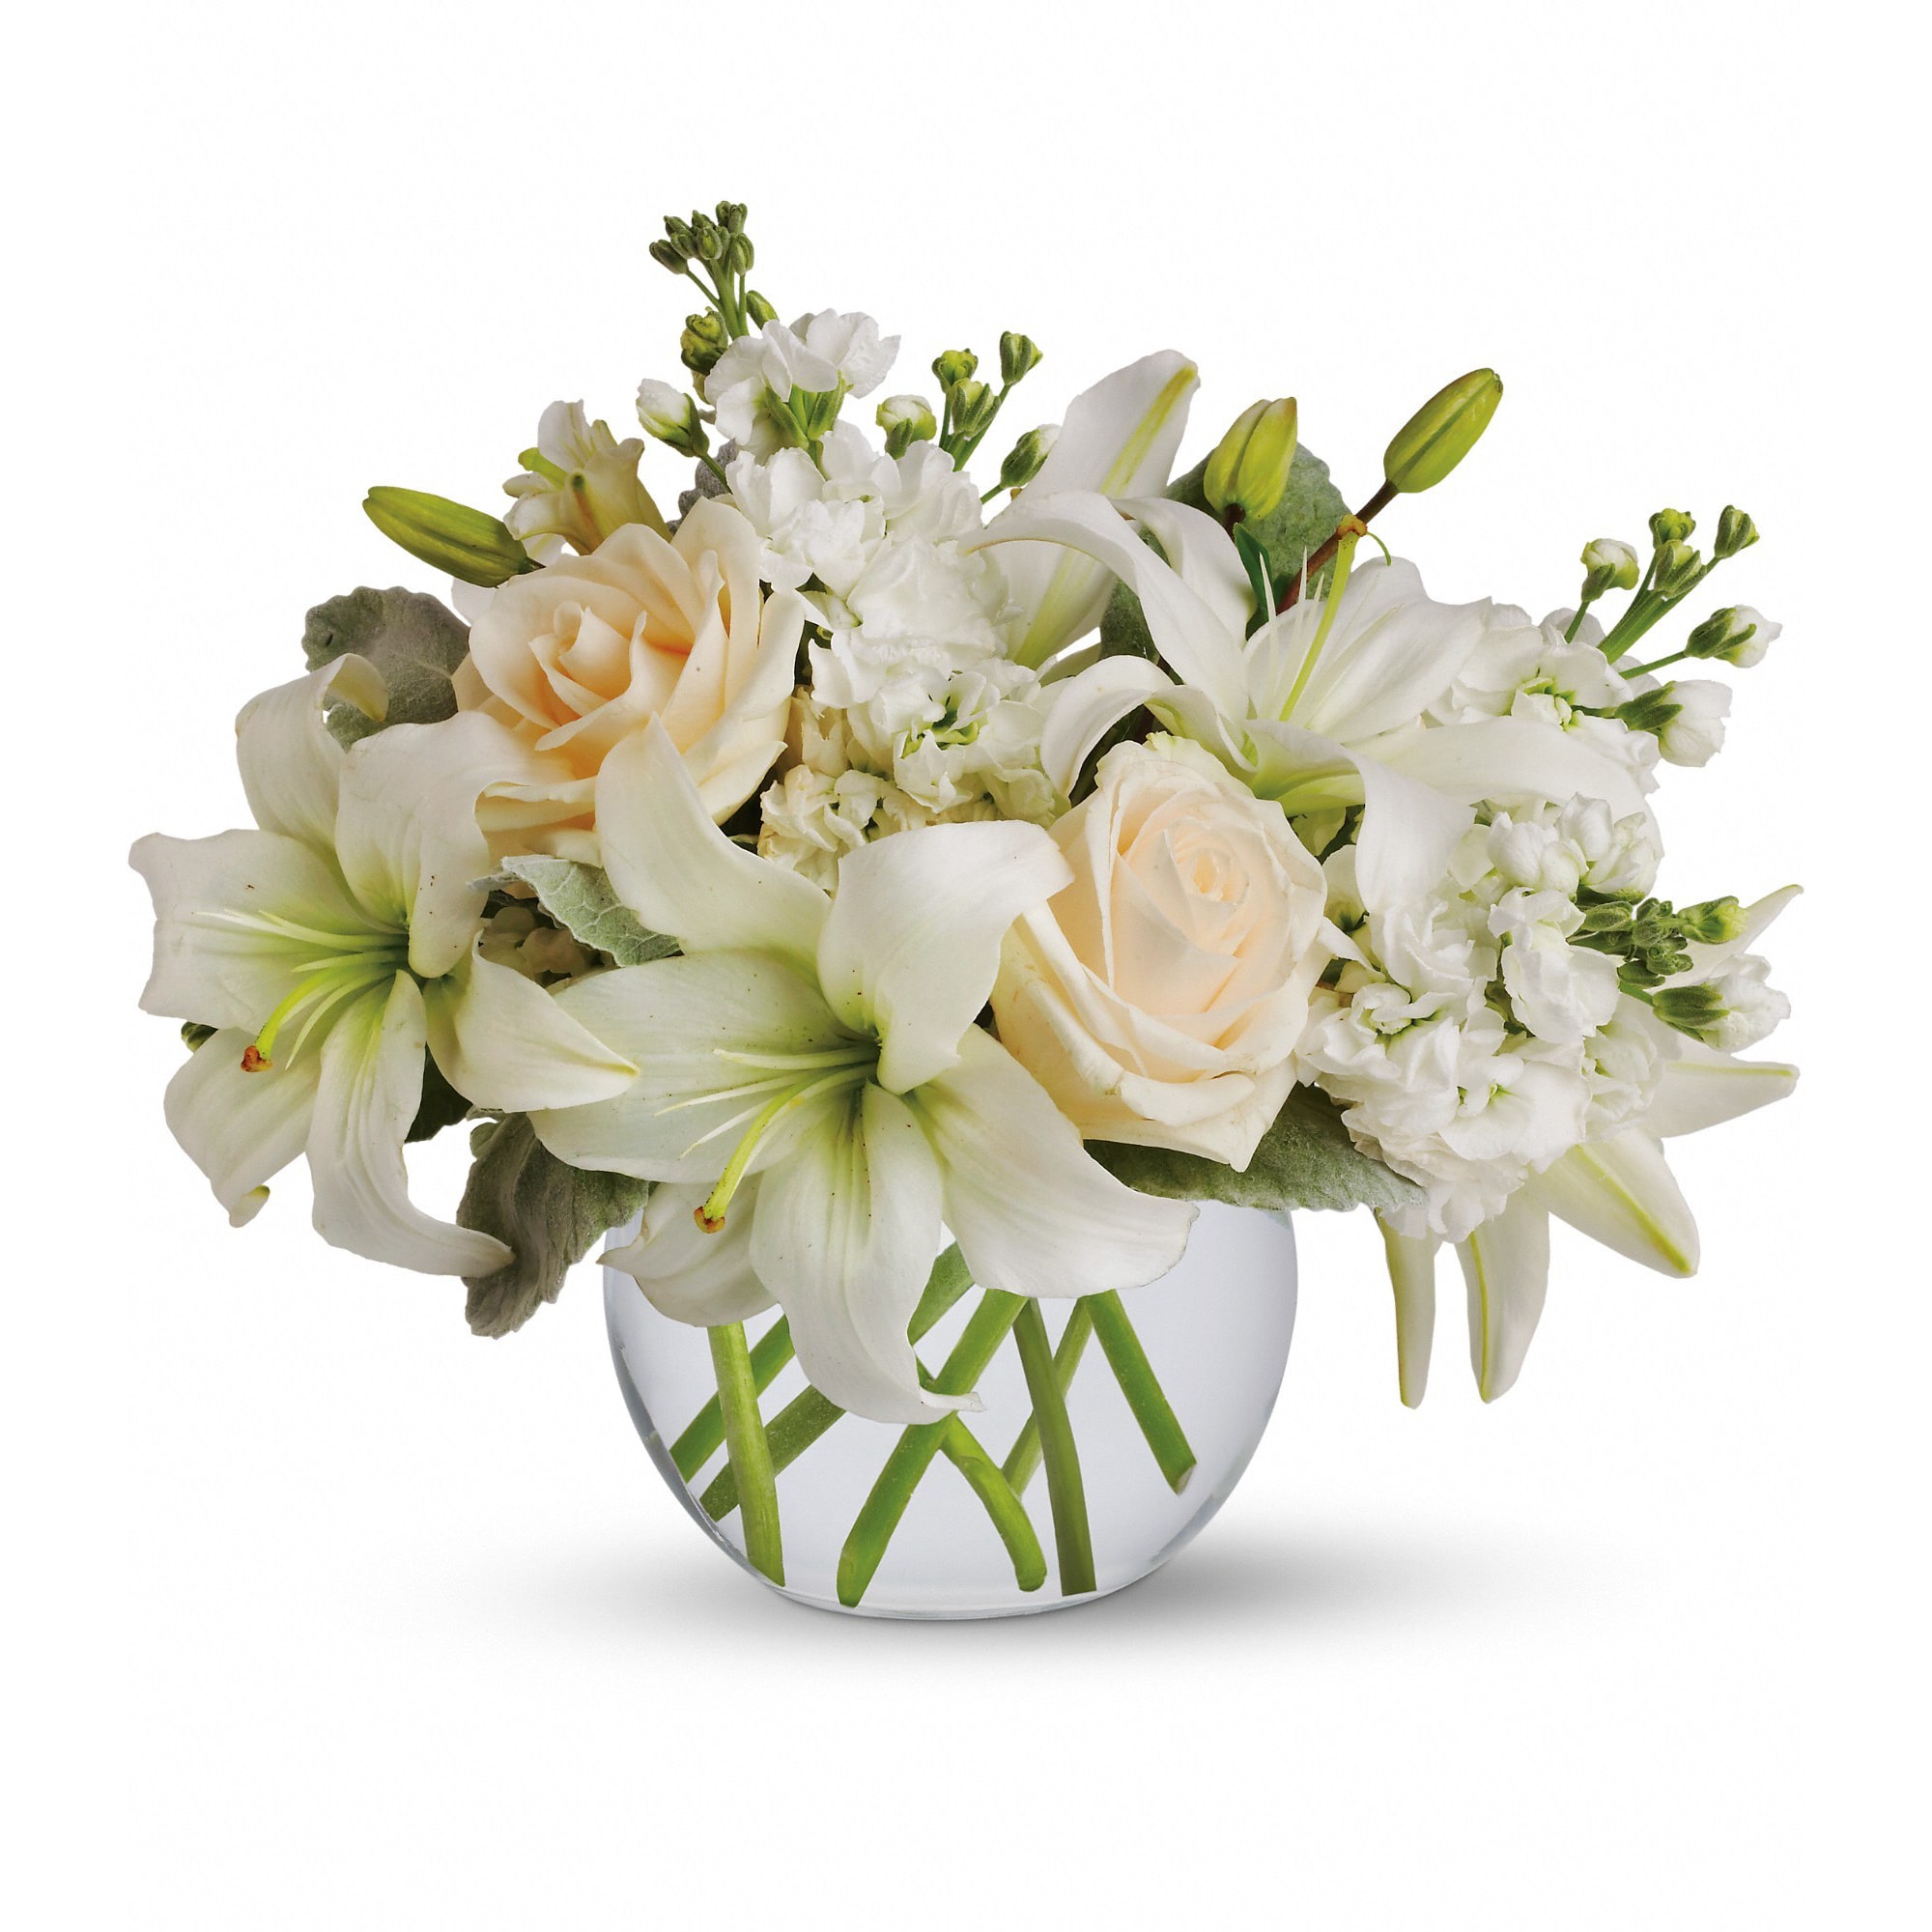 Isle of White by Teleflora - Like a vacation for the senses, this lovely bouquet delivers an oasis of beauty and elegance. Soothing, serene and very special.